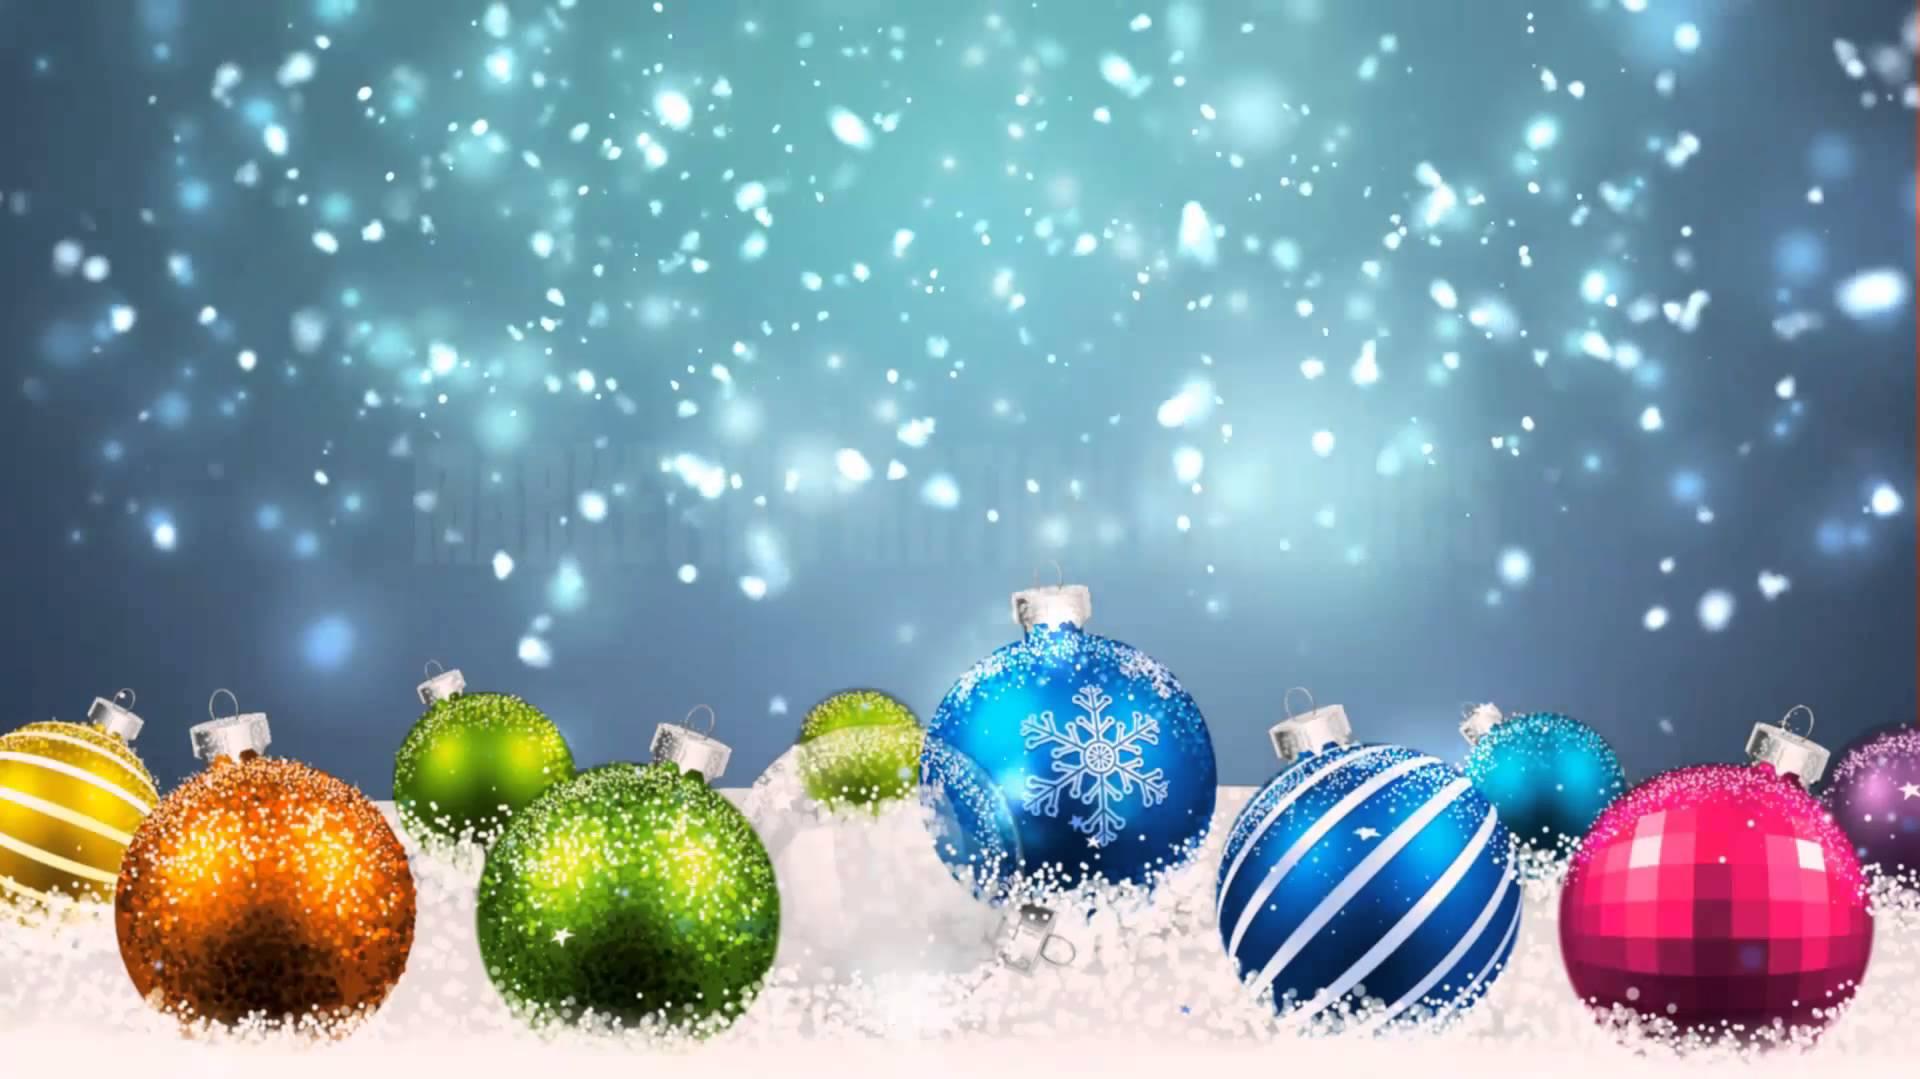 Colorful Christmas Balls In The Snow HD Wallpaper